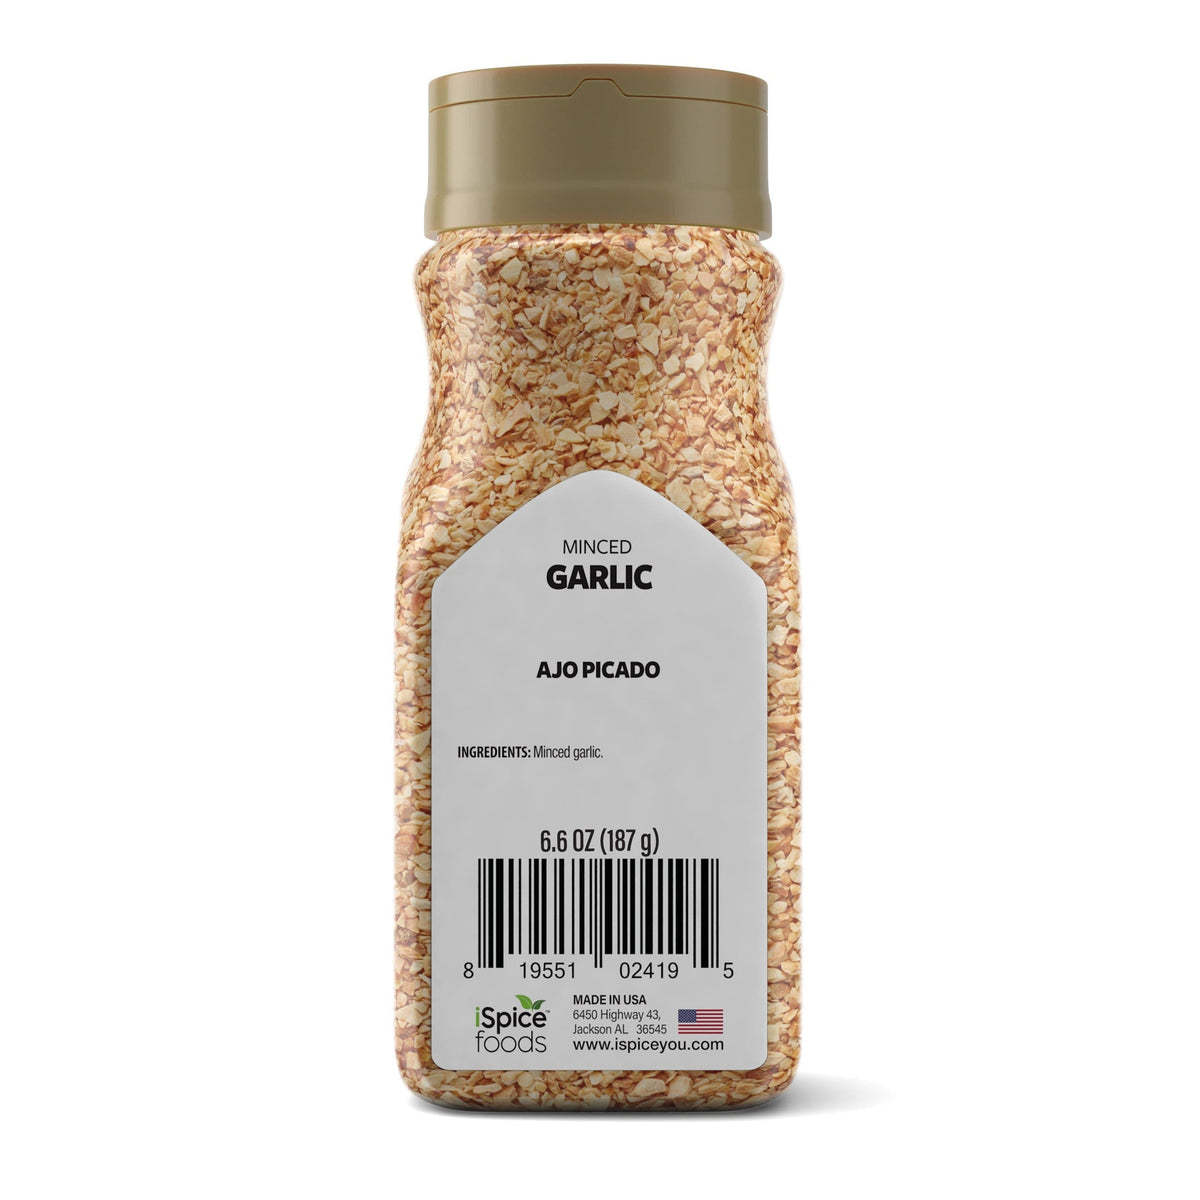 Comparing Fresh and Minced Garlic - Which Is Better? 